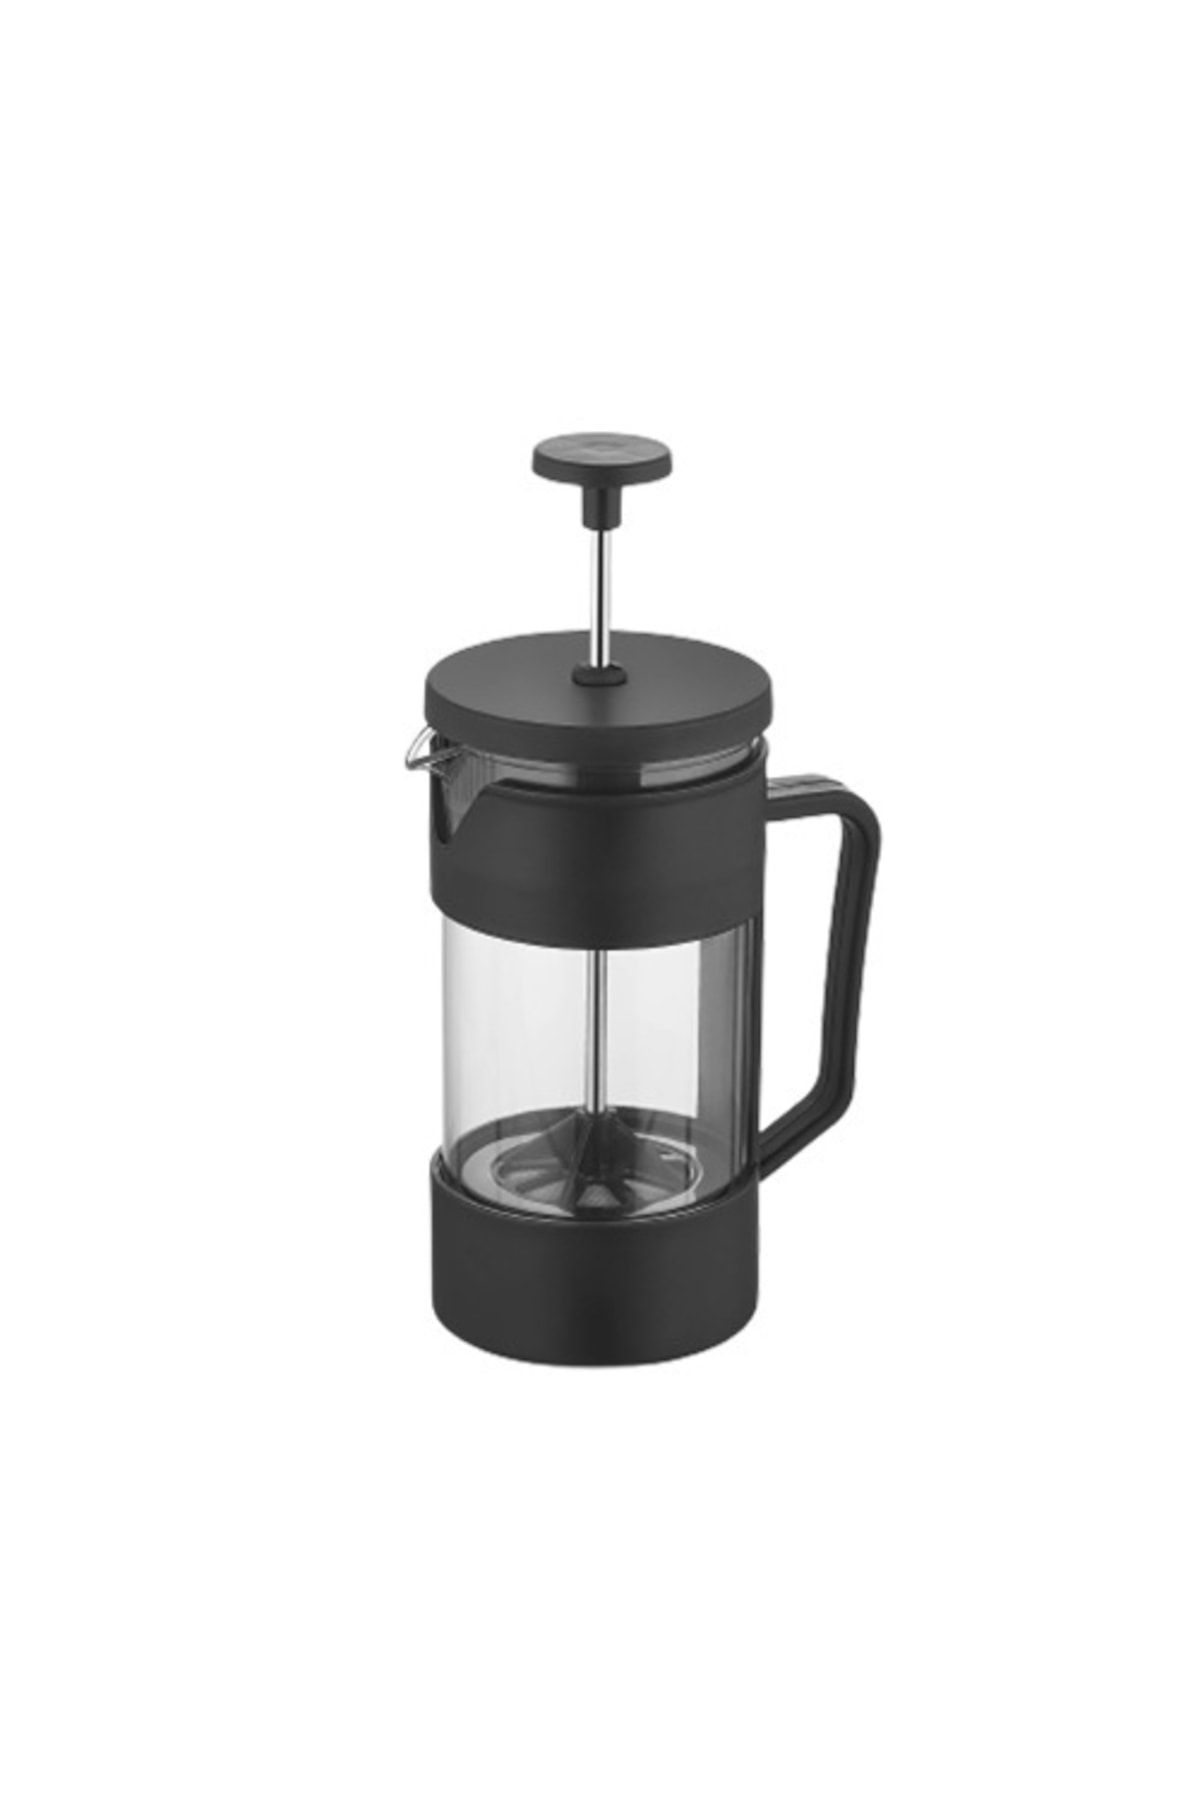 Sinbo Mulier French Press